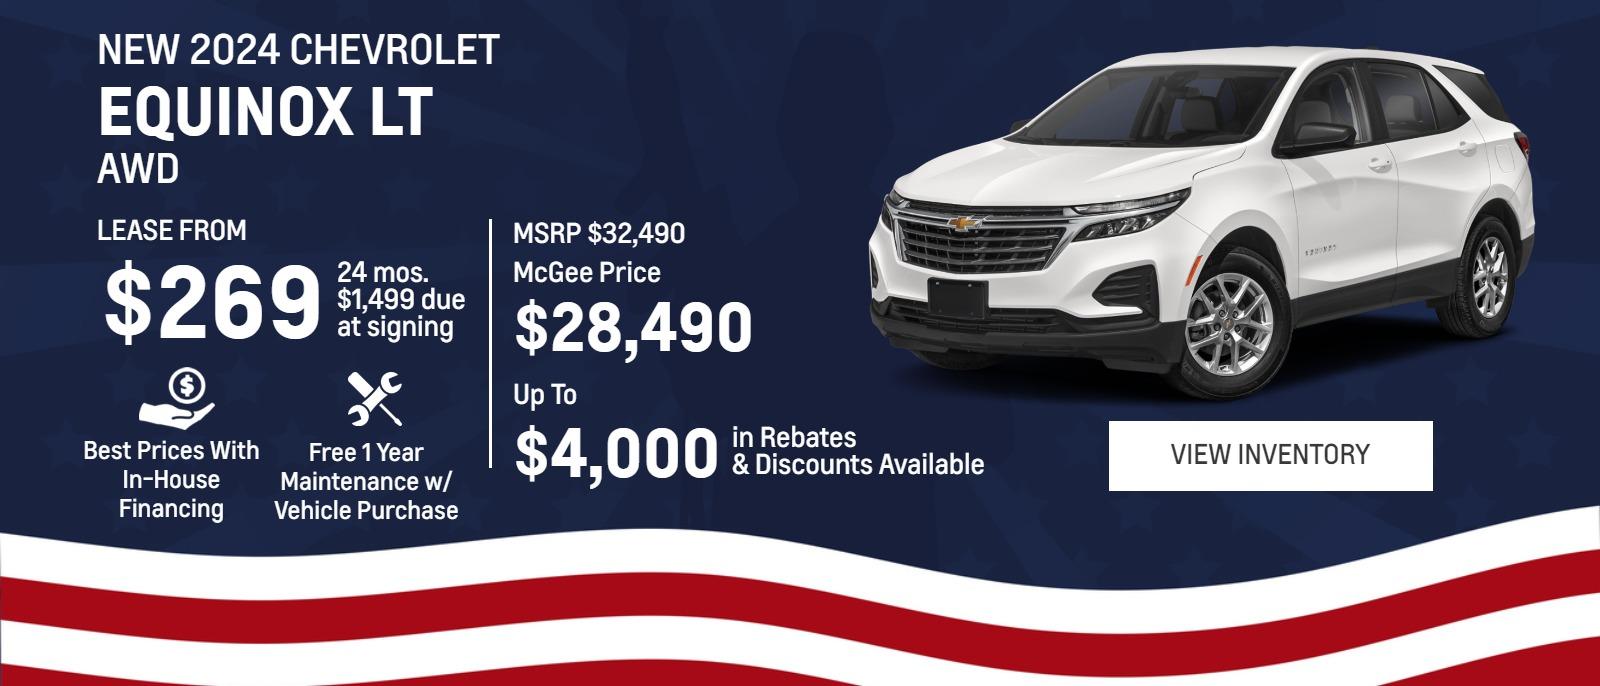 New 2024 Chevrolet
Equinox LT AWD

Lease From
$269
24 mos.
$1,499 due
at signing

MSRP $32,490
McGee Price
$28,490
Up To
$4,000 
in Rebates
&Discounts Available

Best Prices With In-House Financing

Free 1 Year Maintenance
w/ Vehicle Purchase